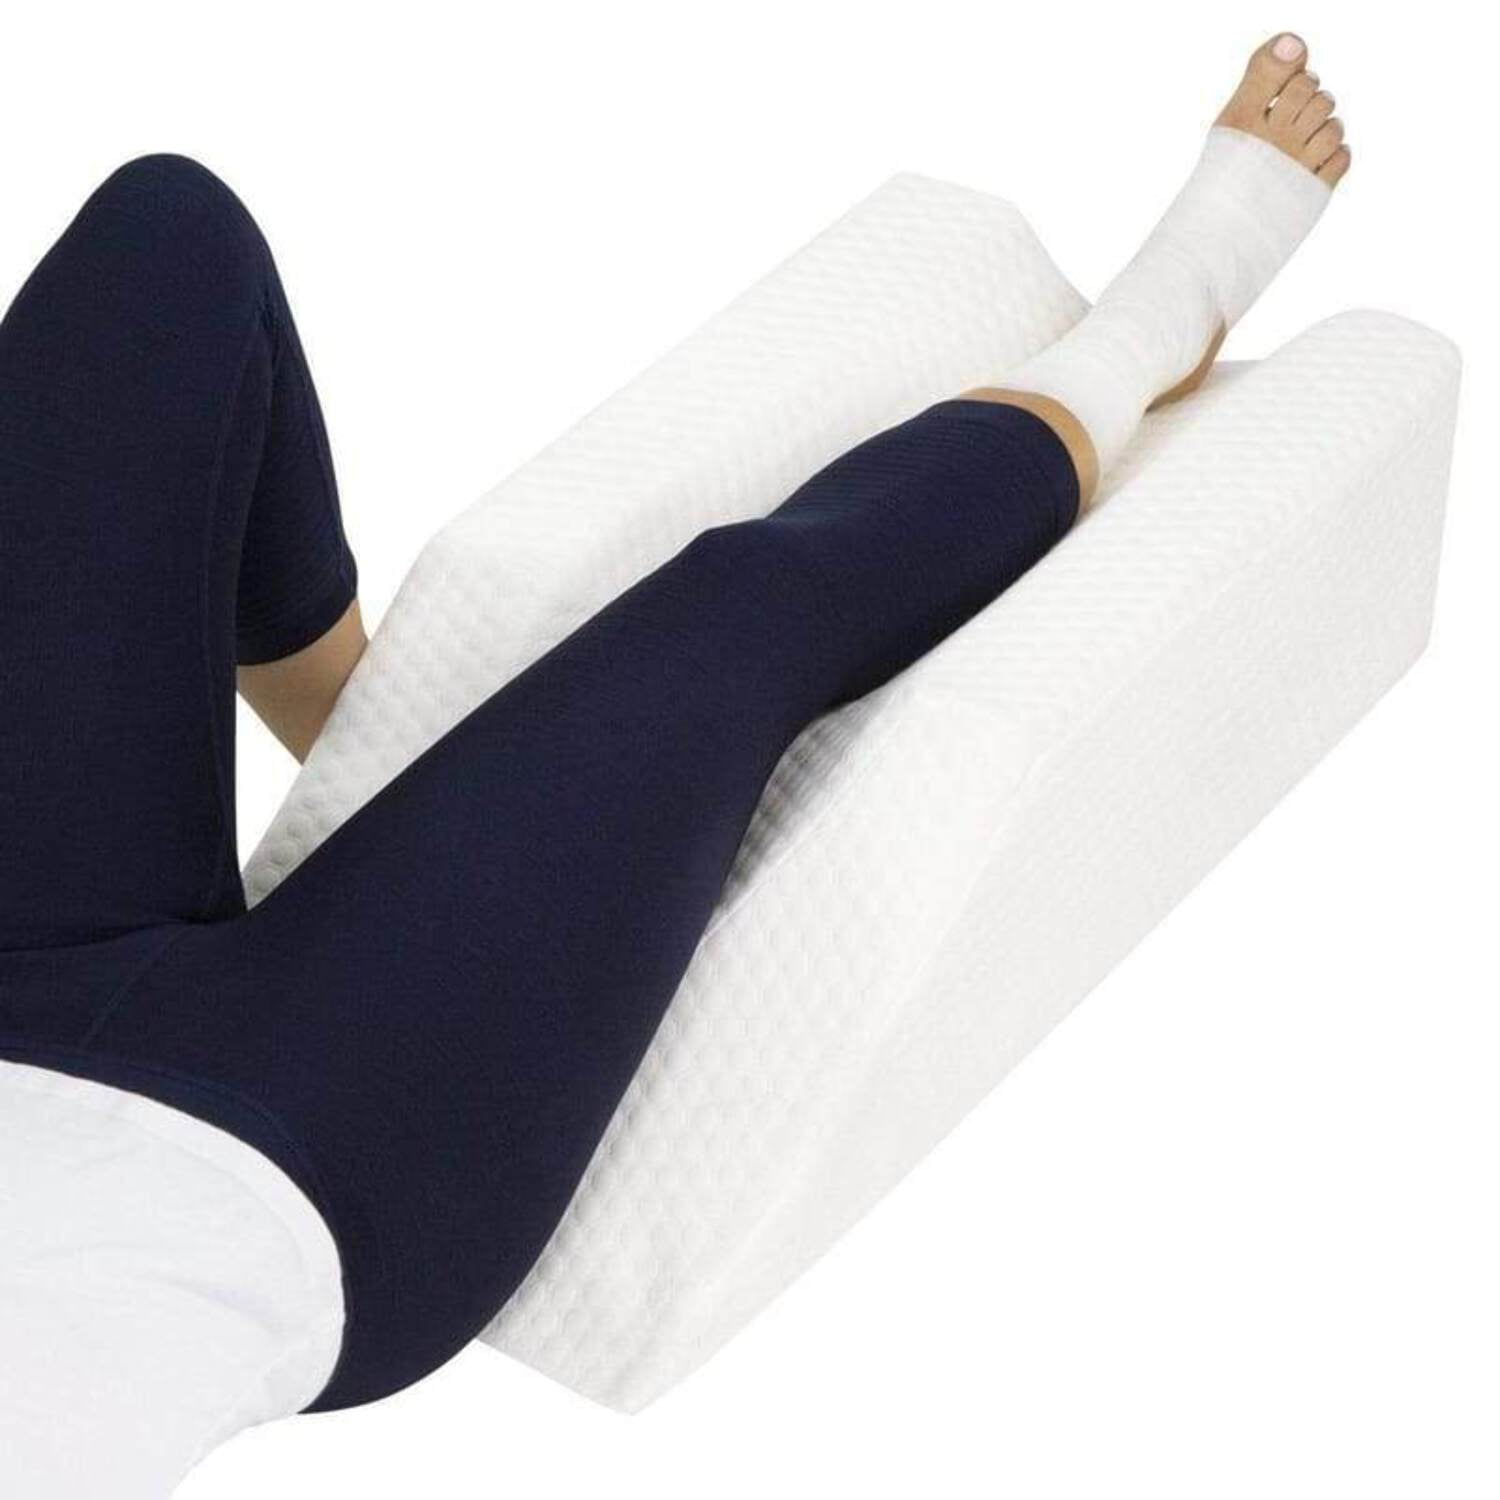 TANYOO Velvet Elevation Leg Pillows for Ankle Surgery Recovery, Broken  Foot, Hip and Knee Pain Relief Medium Size for Children and Short Persons